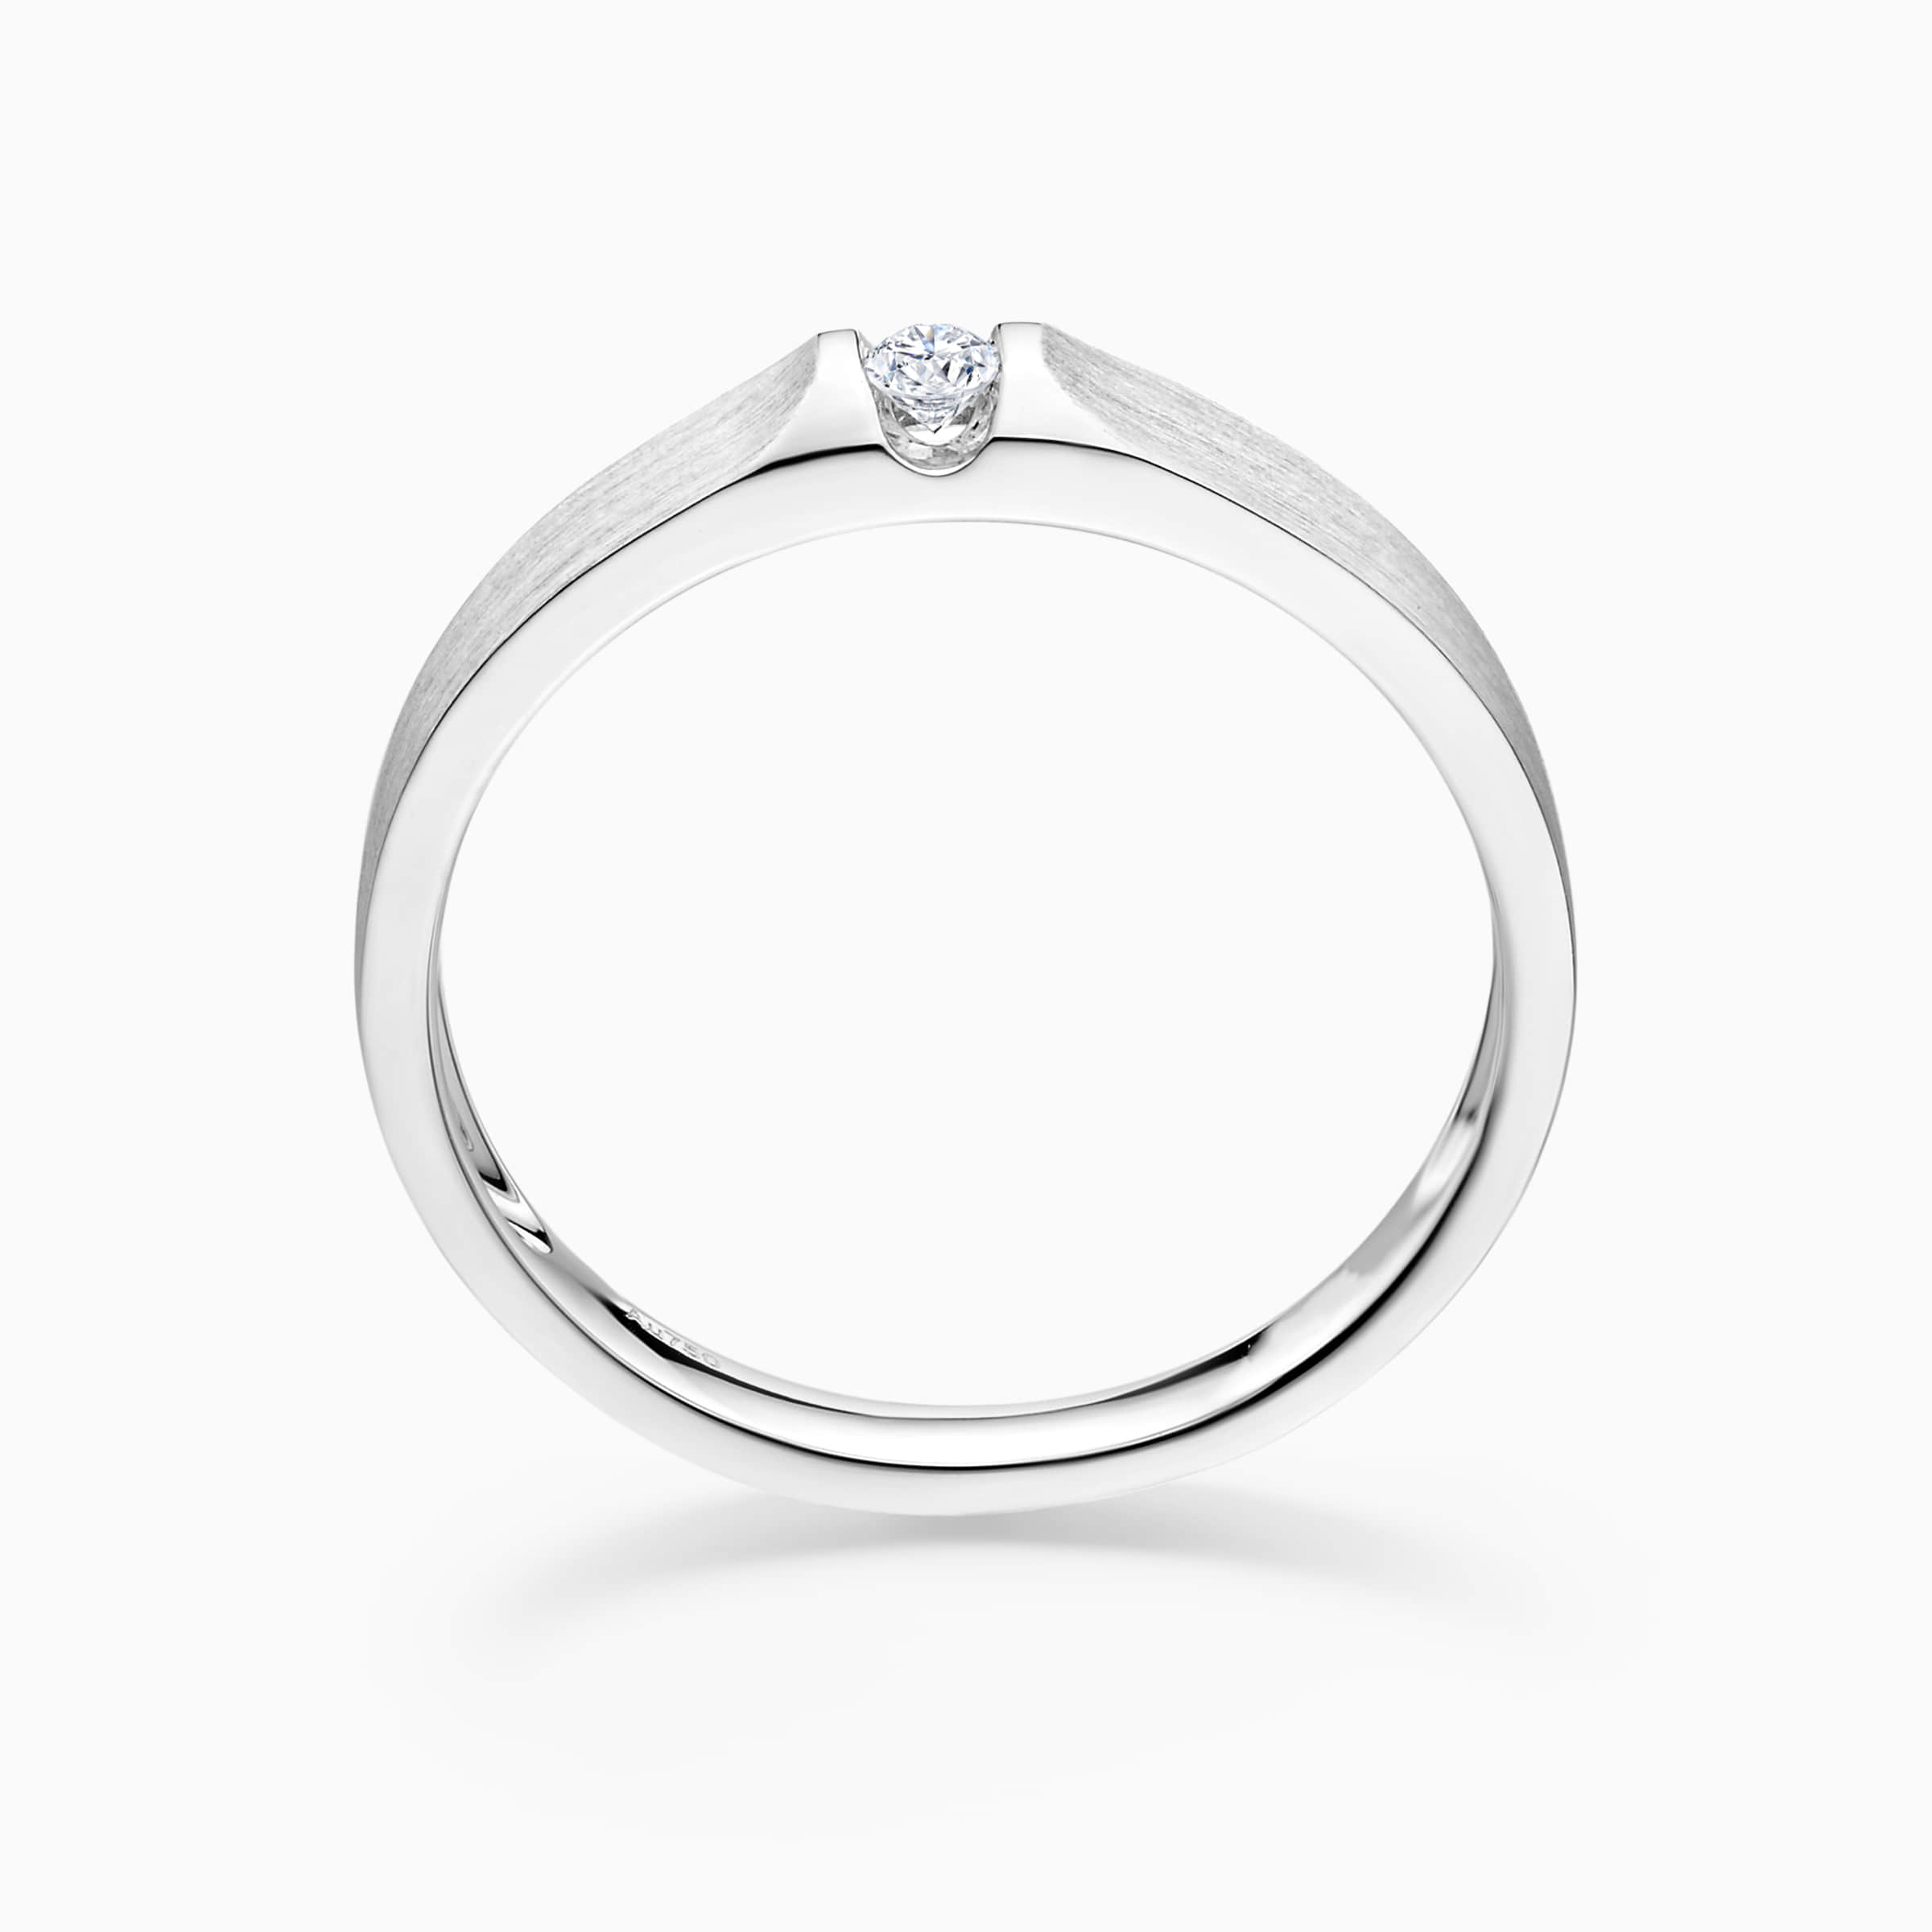 Darry Ring male wedding band in white gold